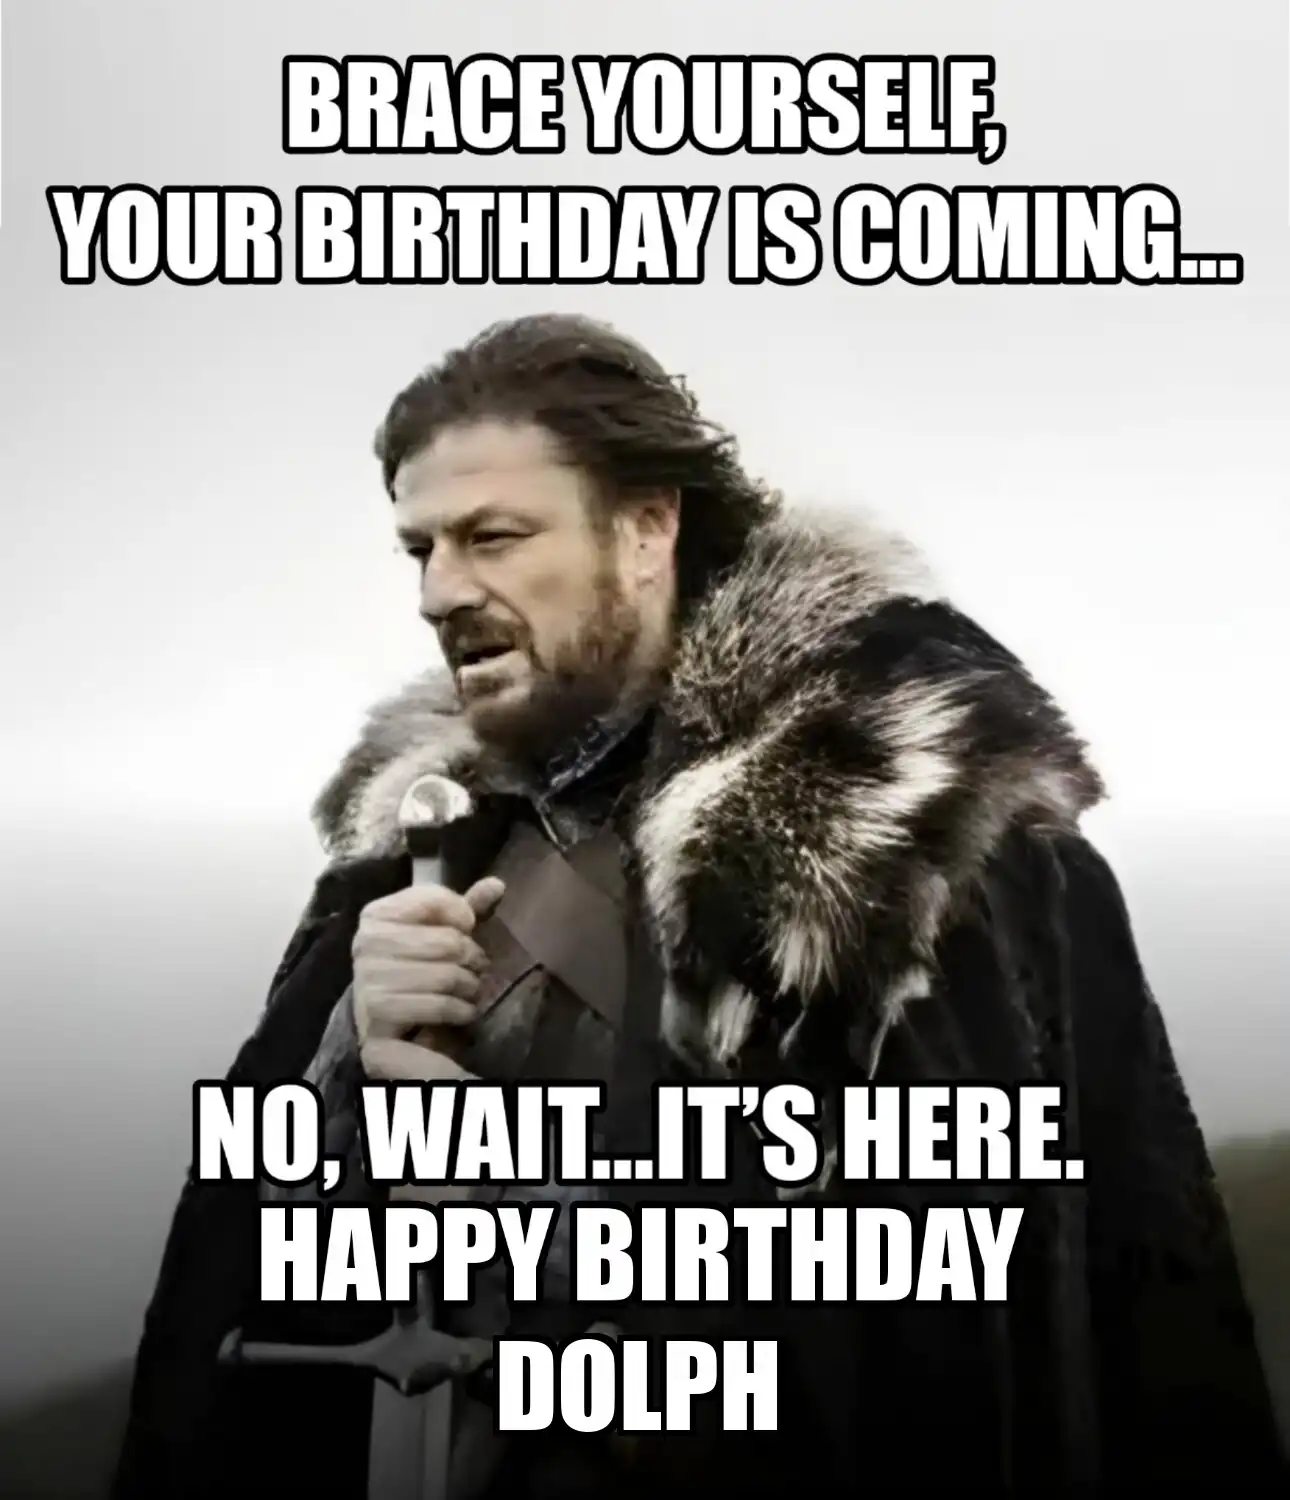 Happy Birthday Dolph Brace Yourself Your Birthday Is Coming Meme